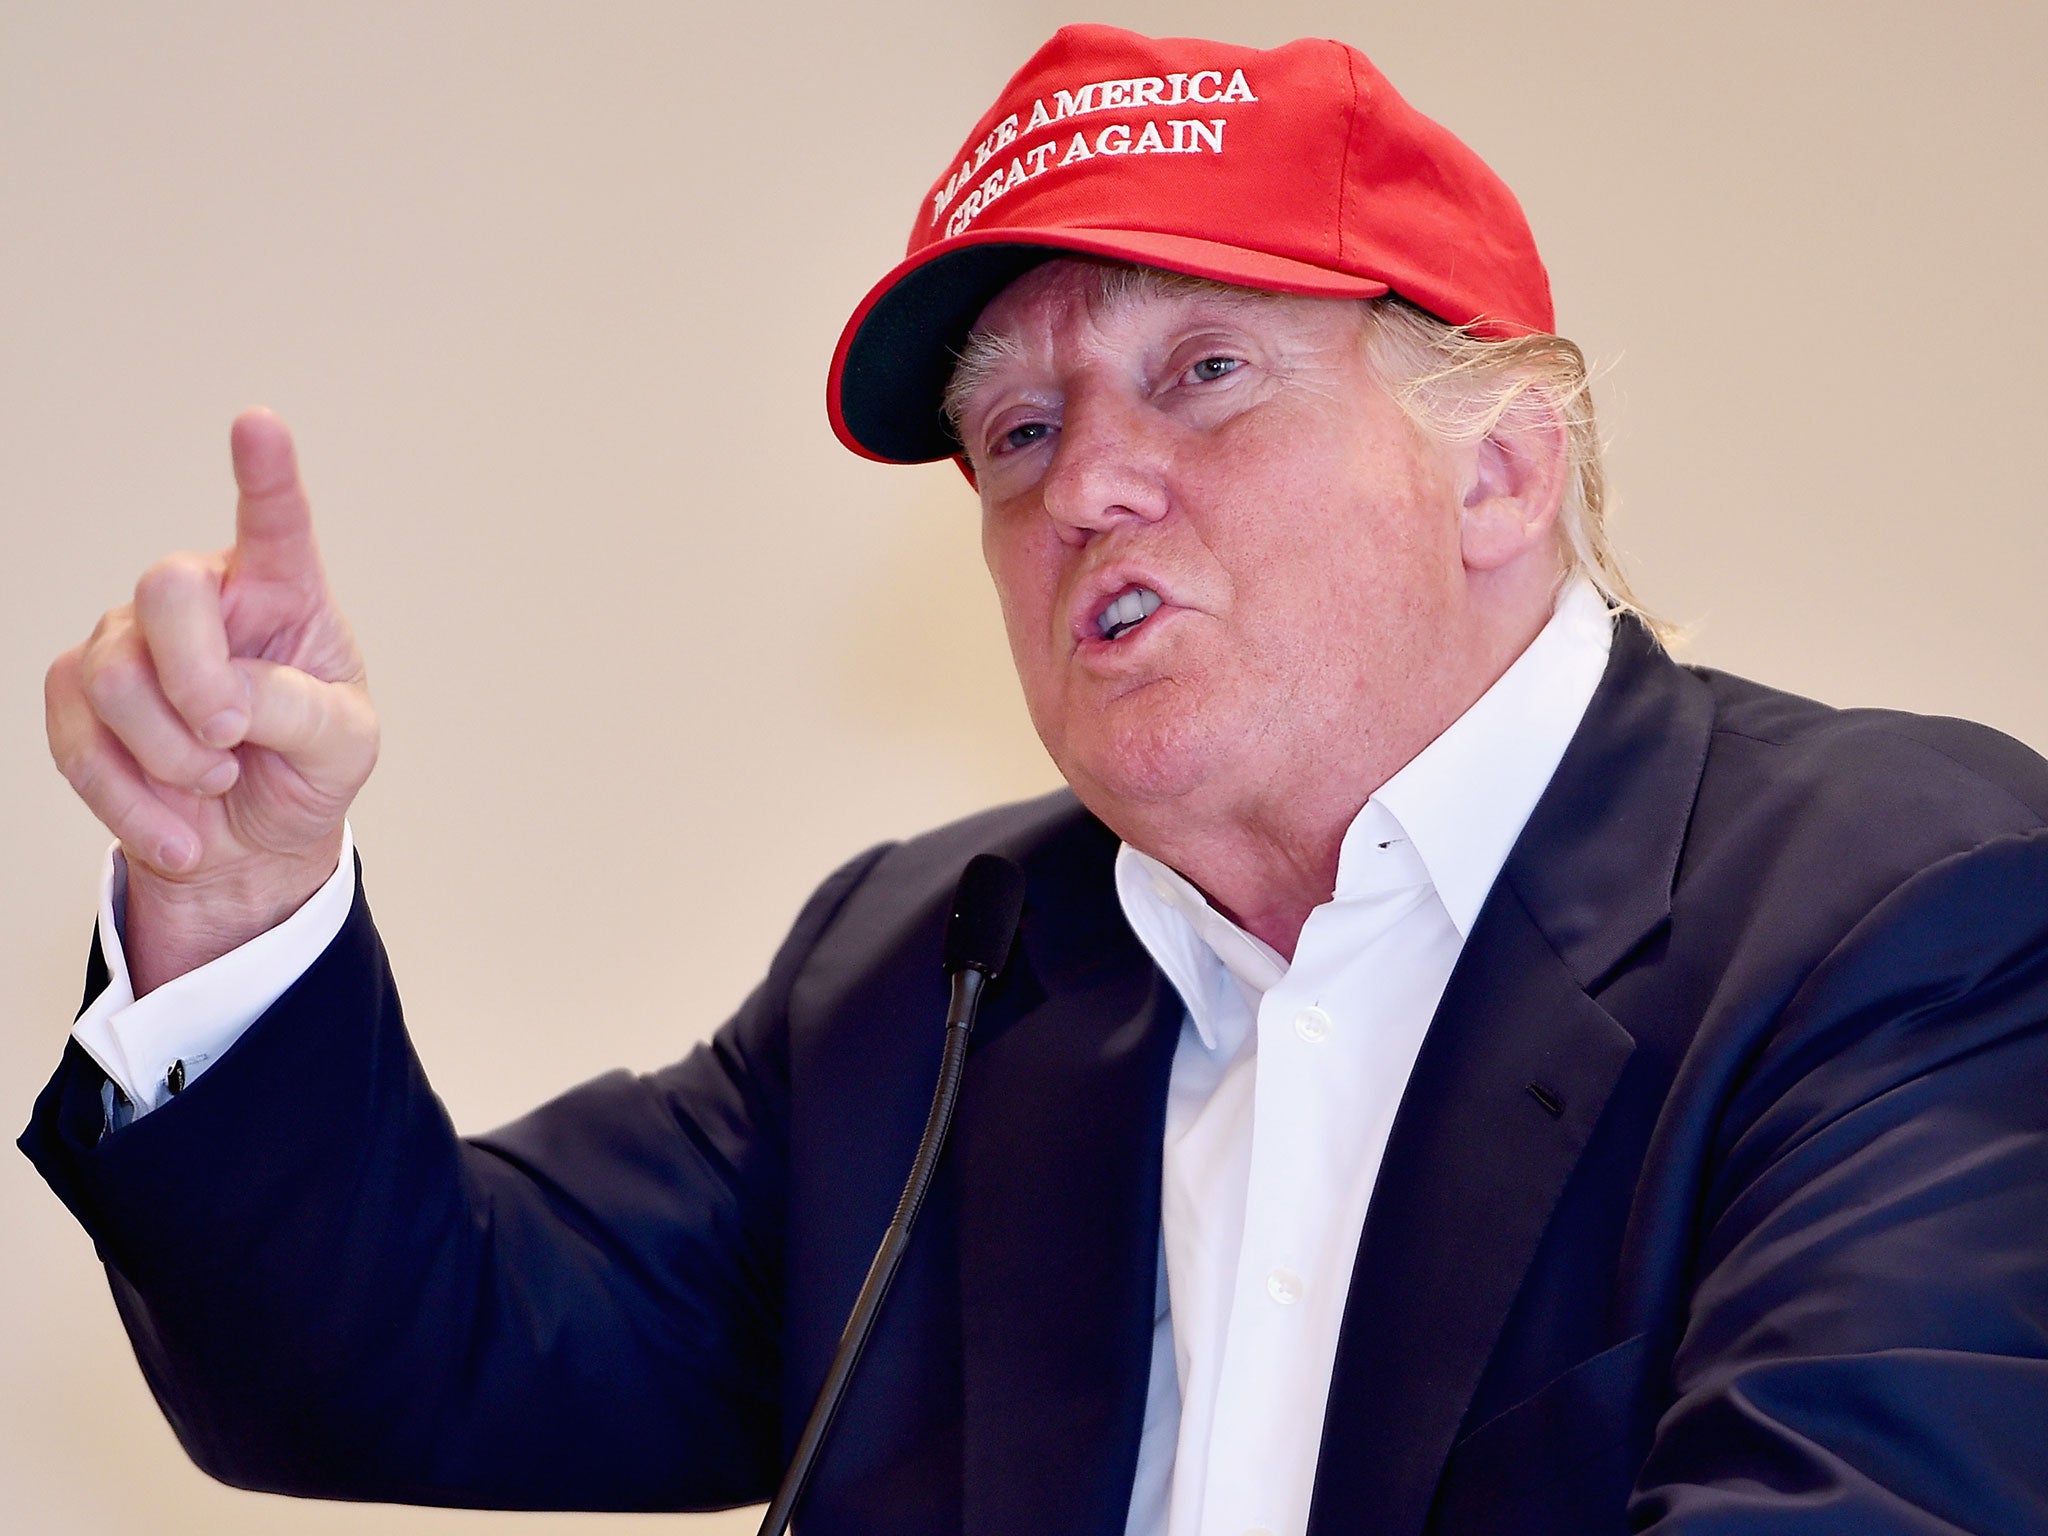 Donald Trump wearing one of his campaign hats with the slogan 'Make America Great Again'